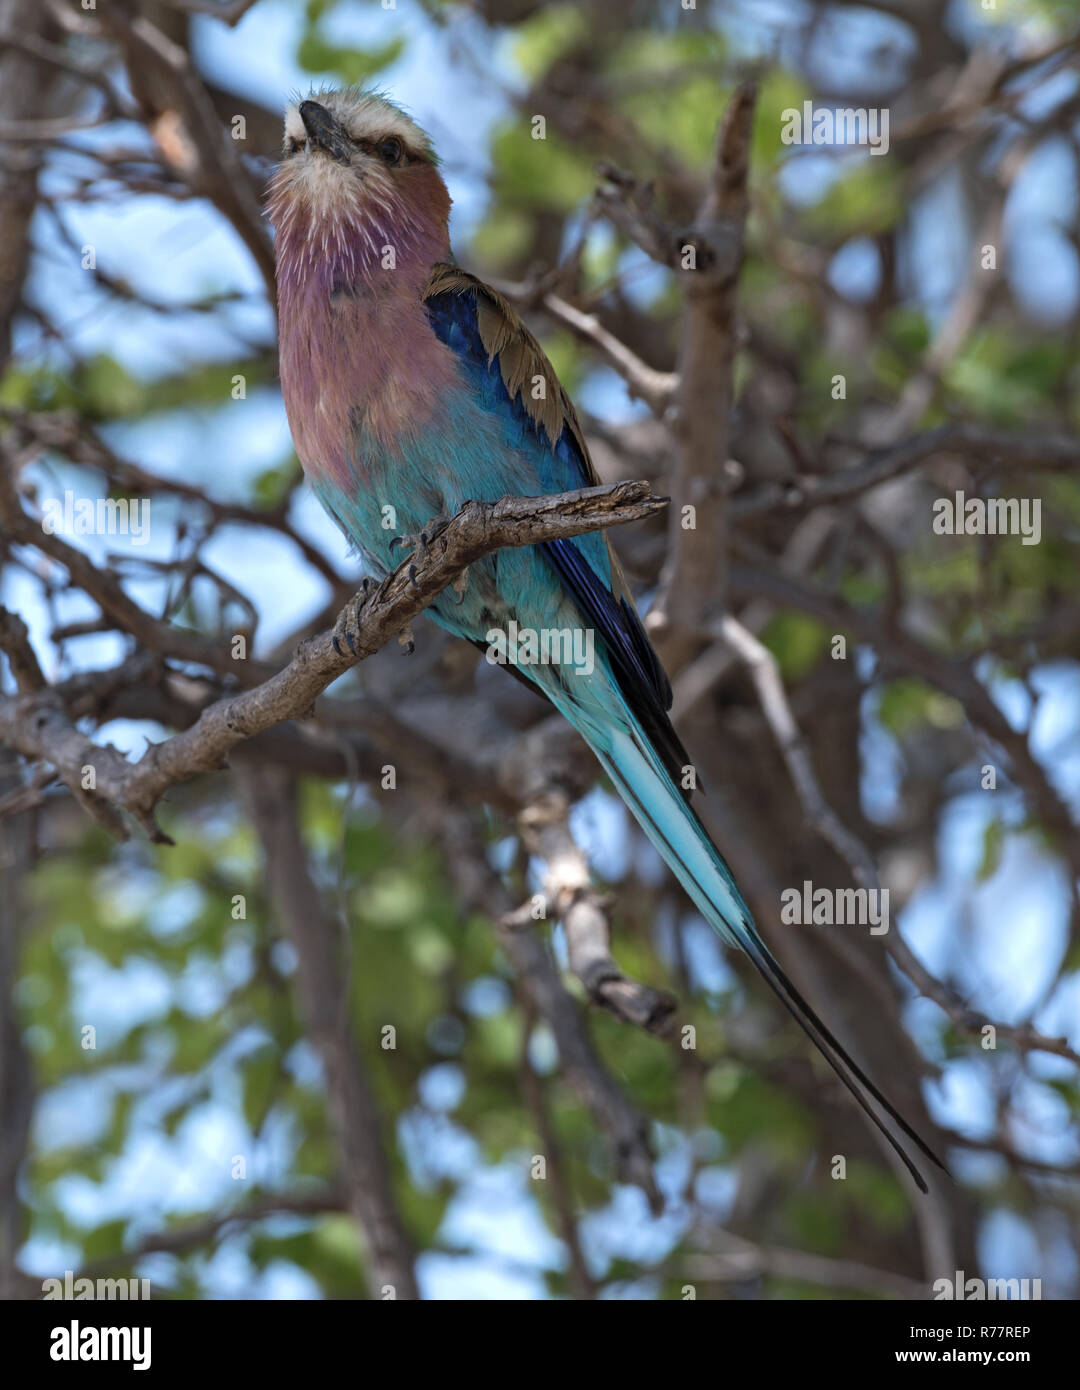 Lilac-breasted roller perched on a tree branch Stock Photo